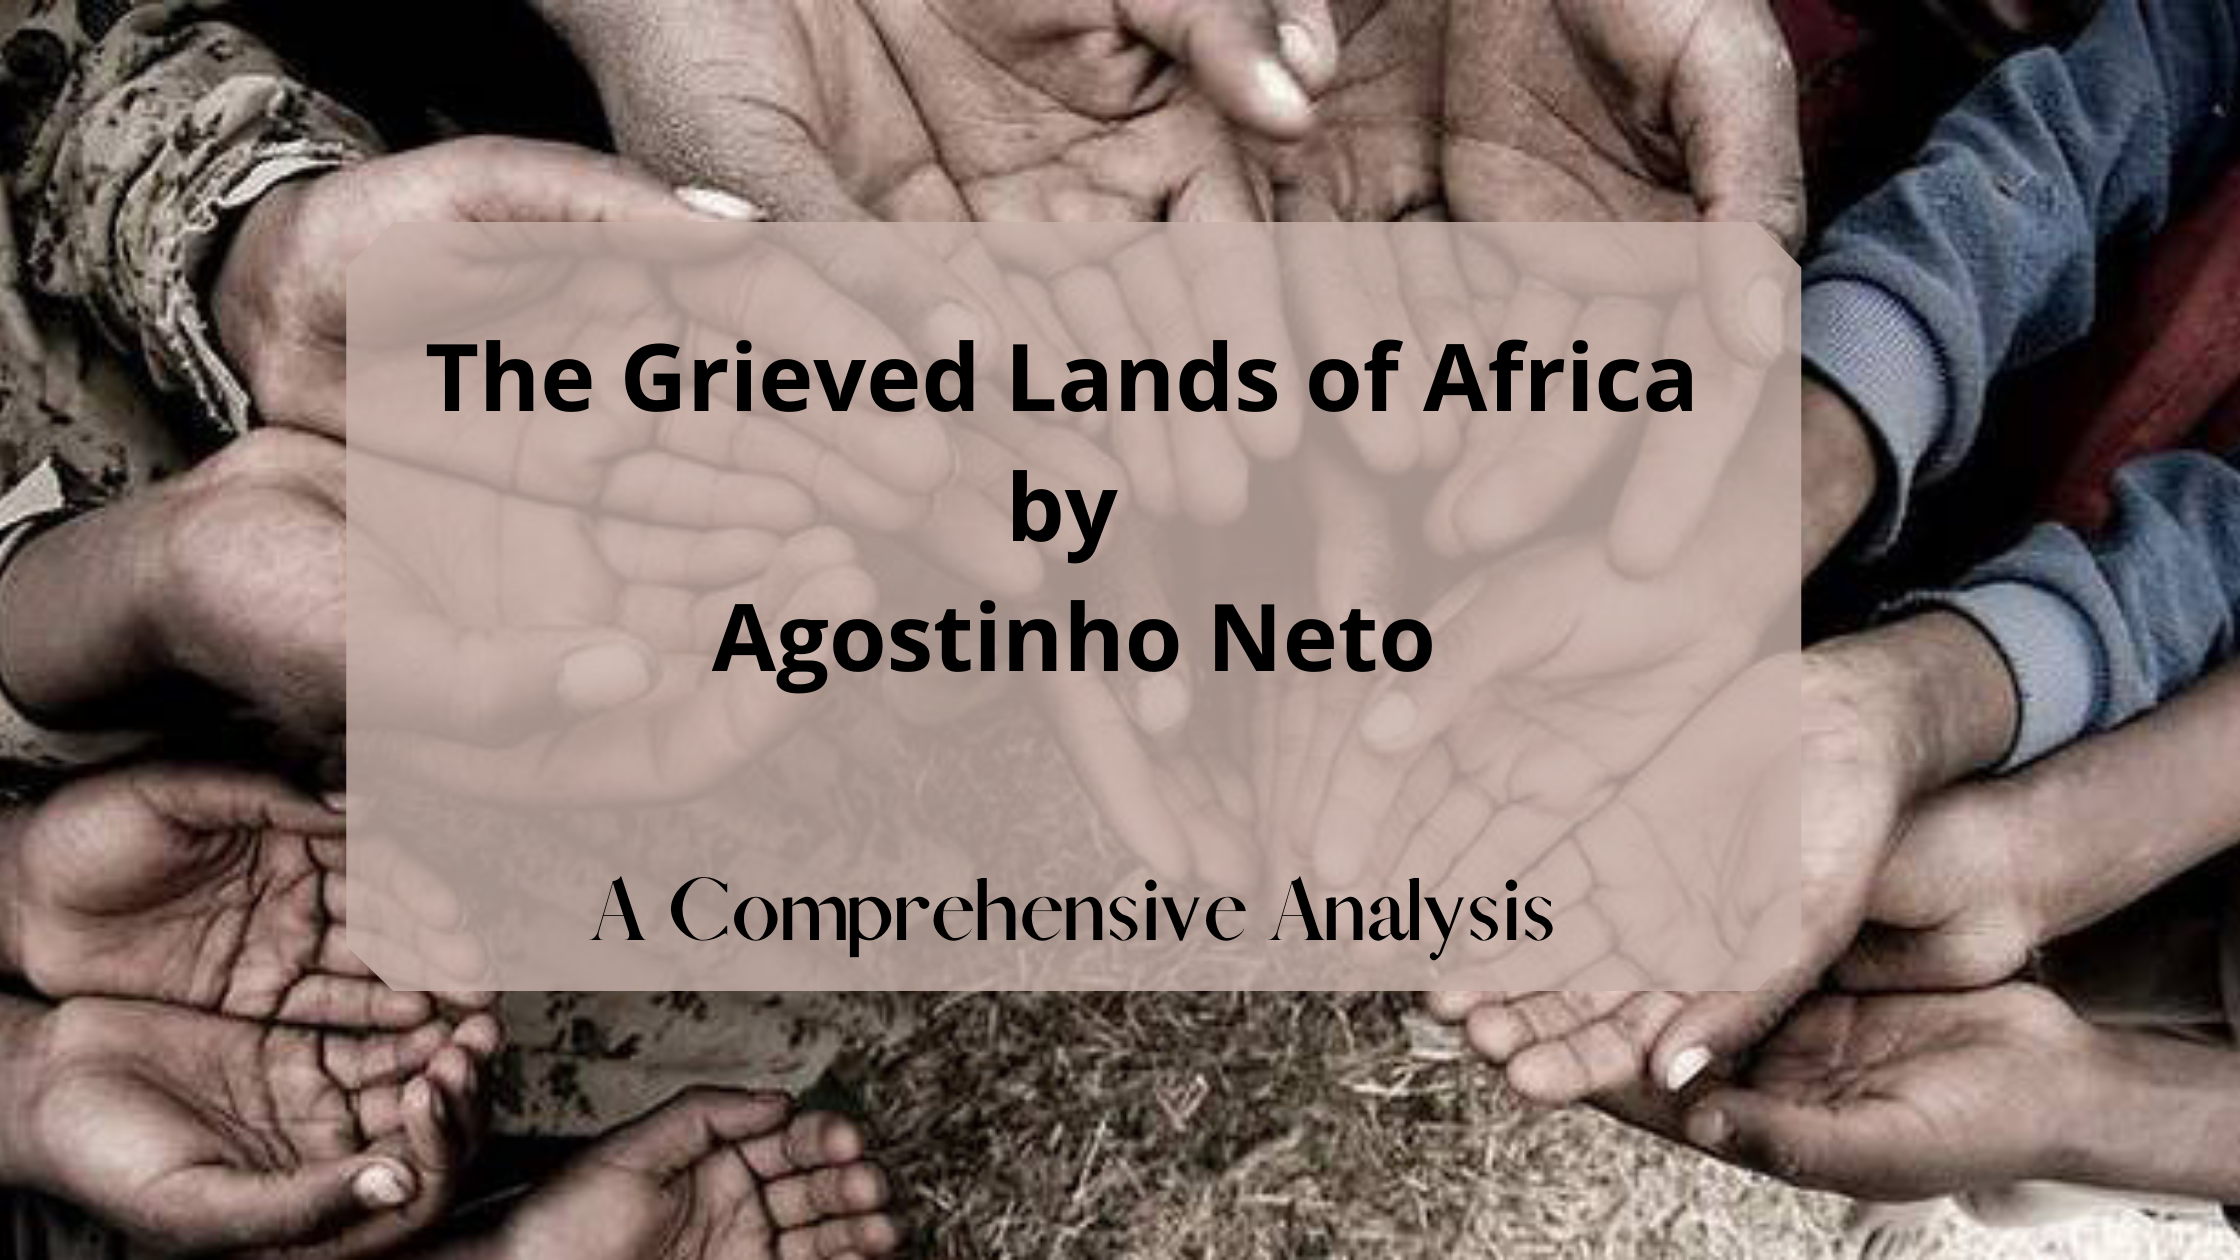 A Comprehensive Analysis of the Grieved Lands of Africa by Agostinho Neto